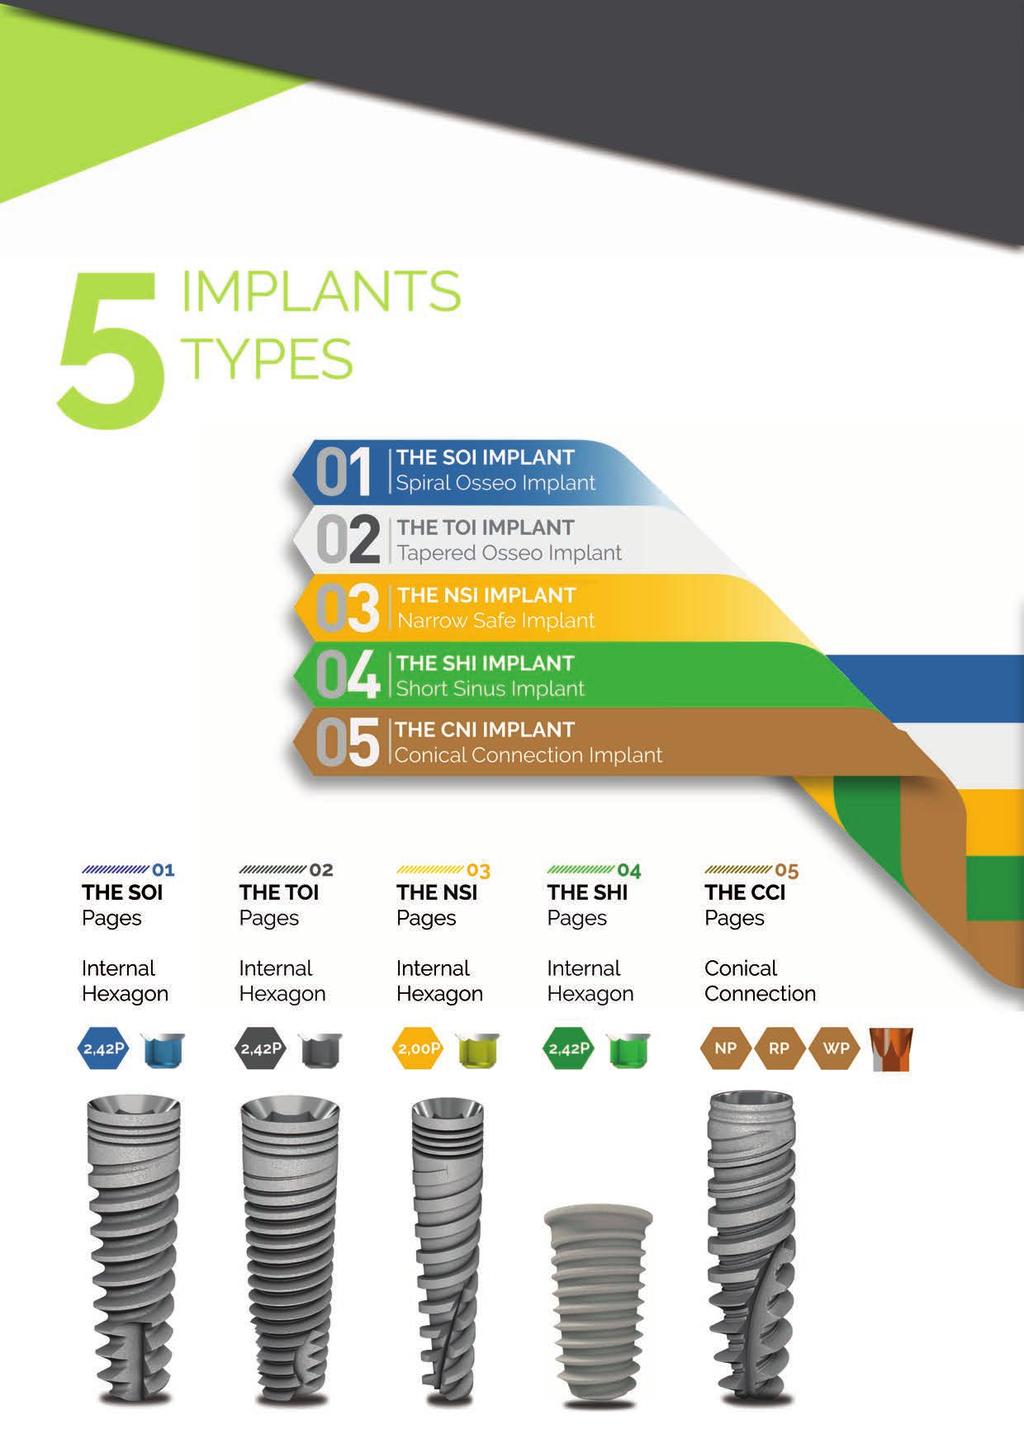 MiPRO is proud to present a wide range of implant systems, providing simple solutions for all clinicsl procedures.